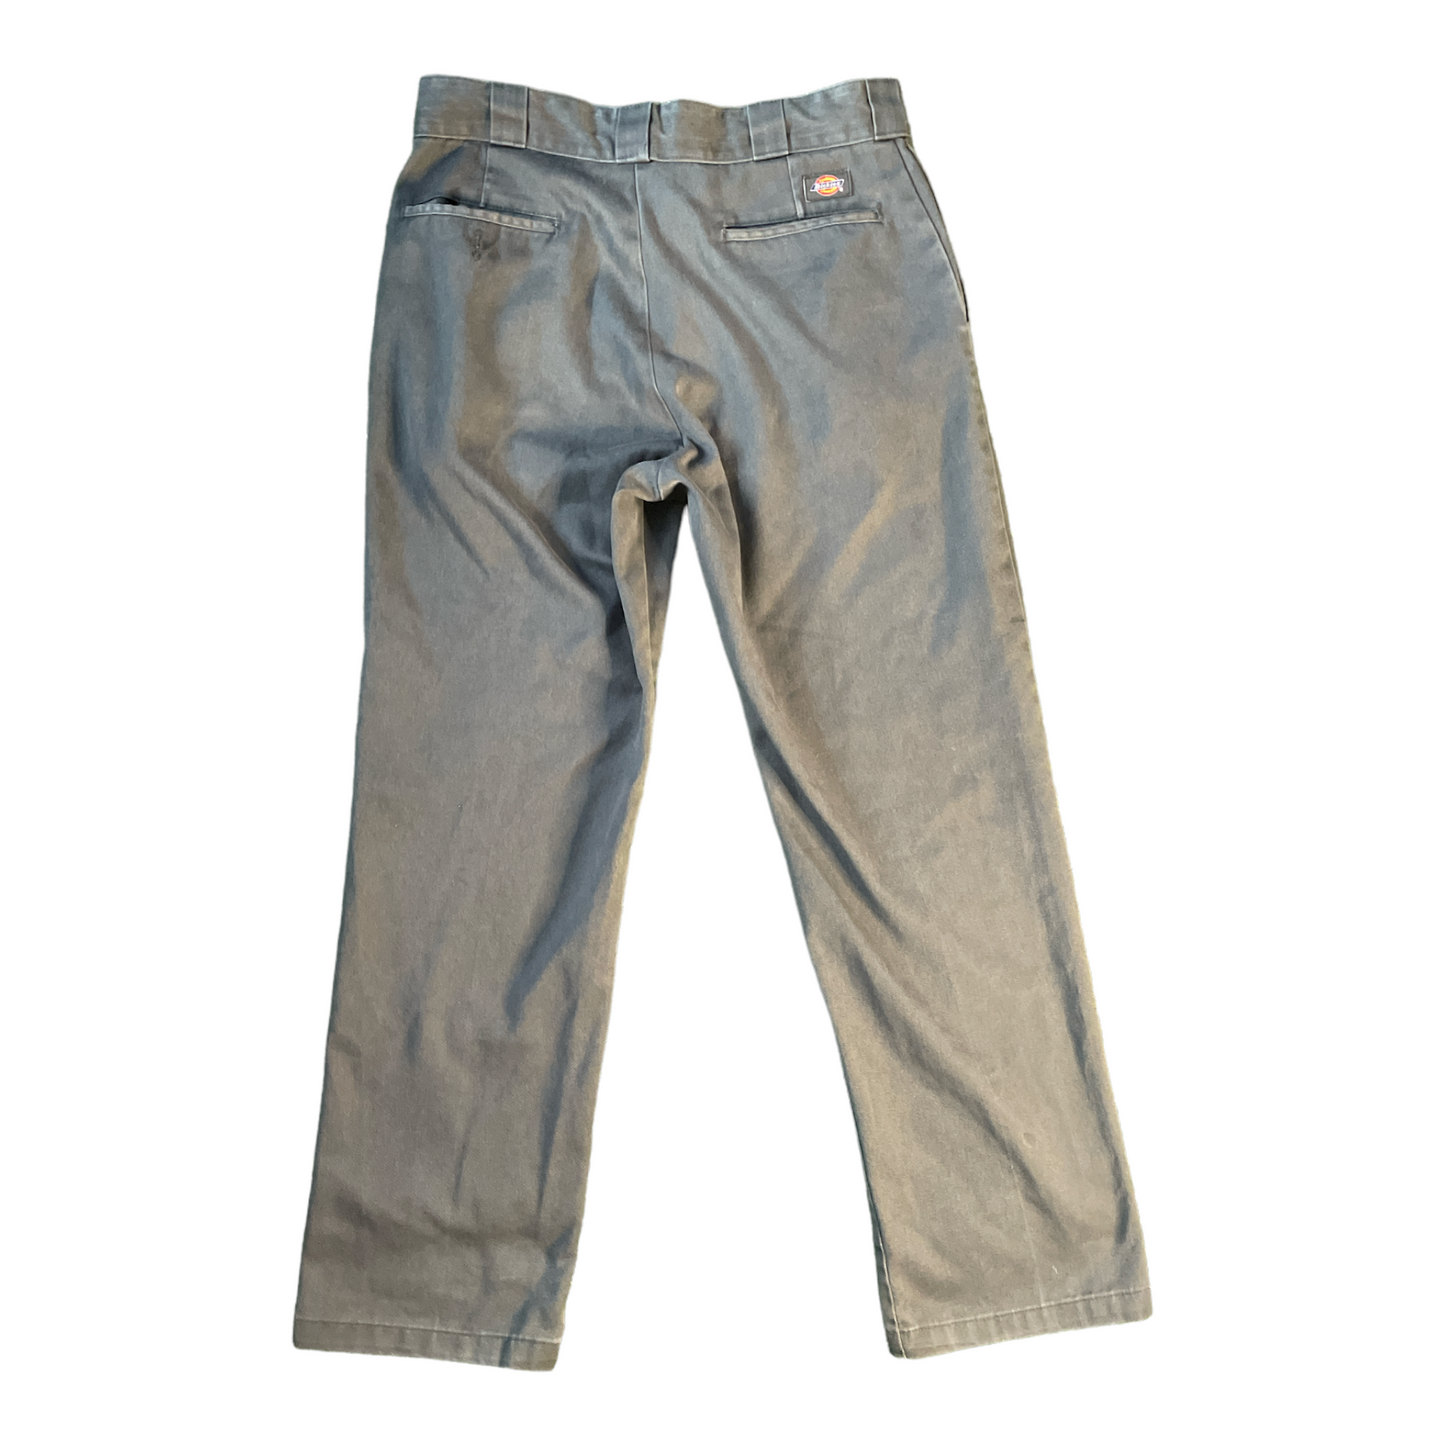 Worked Dickie Jeans 33W 31L